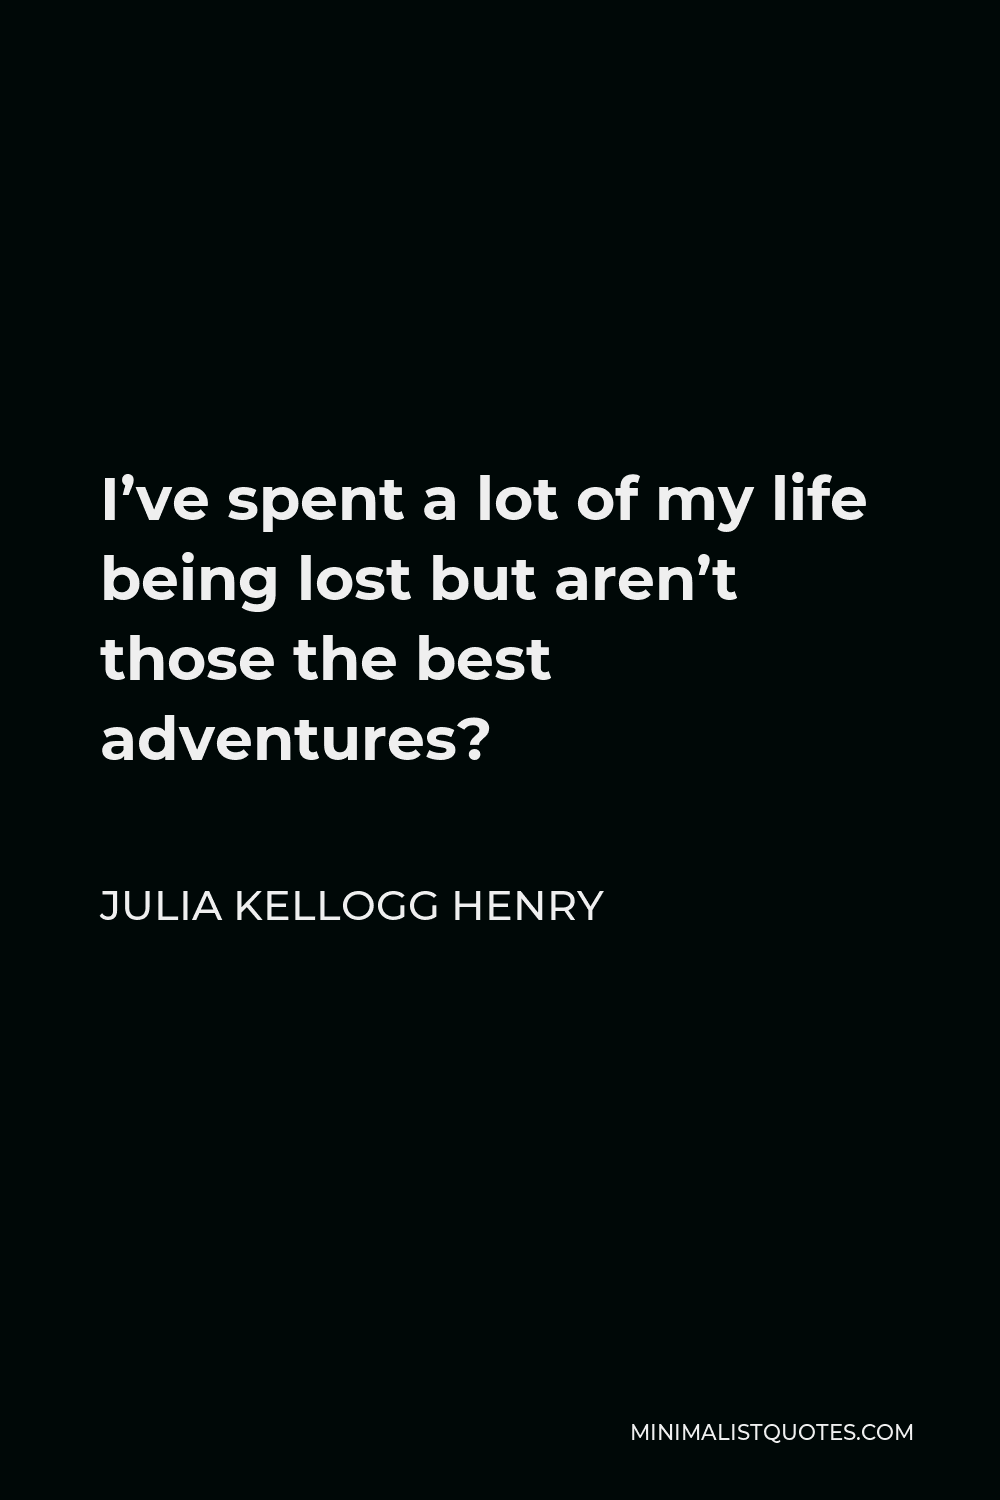 Julia Kellogg Henry Quote - I’ve spent a lot of my life being lost but aren’t those the best adventures?